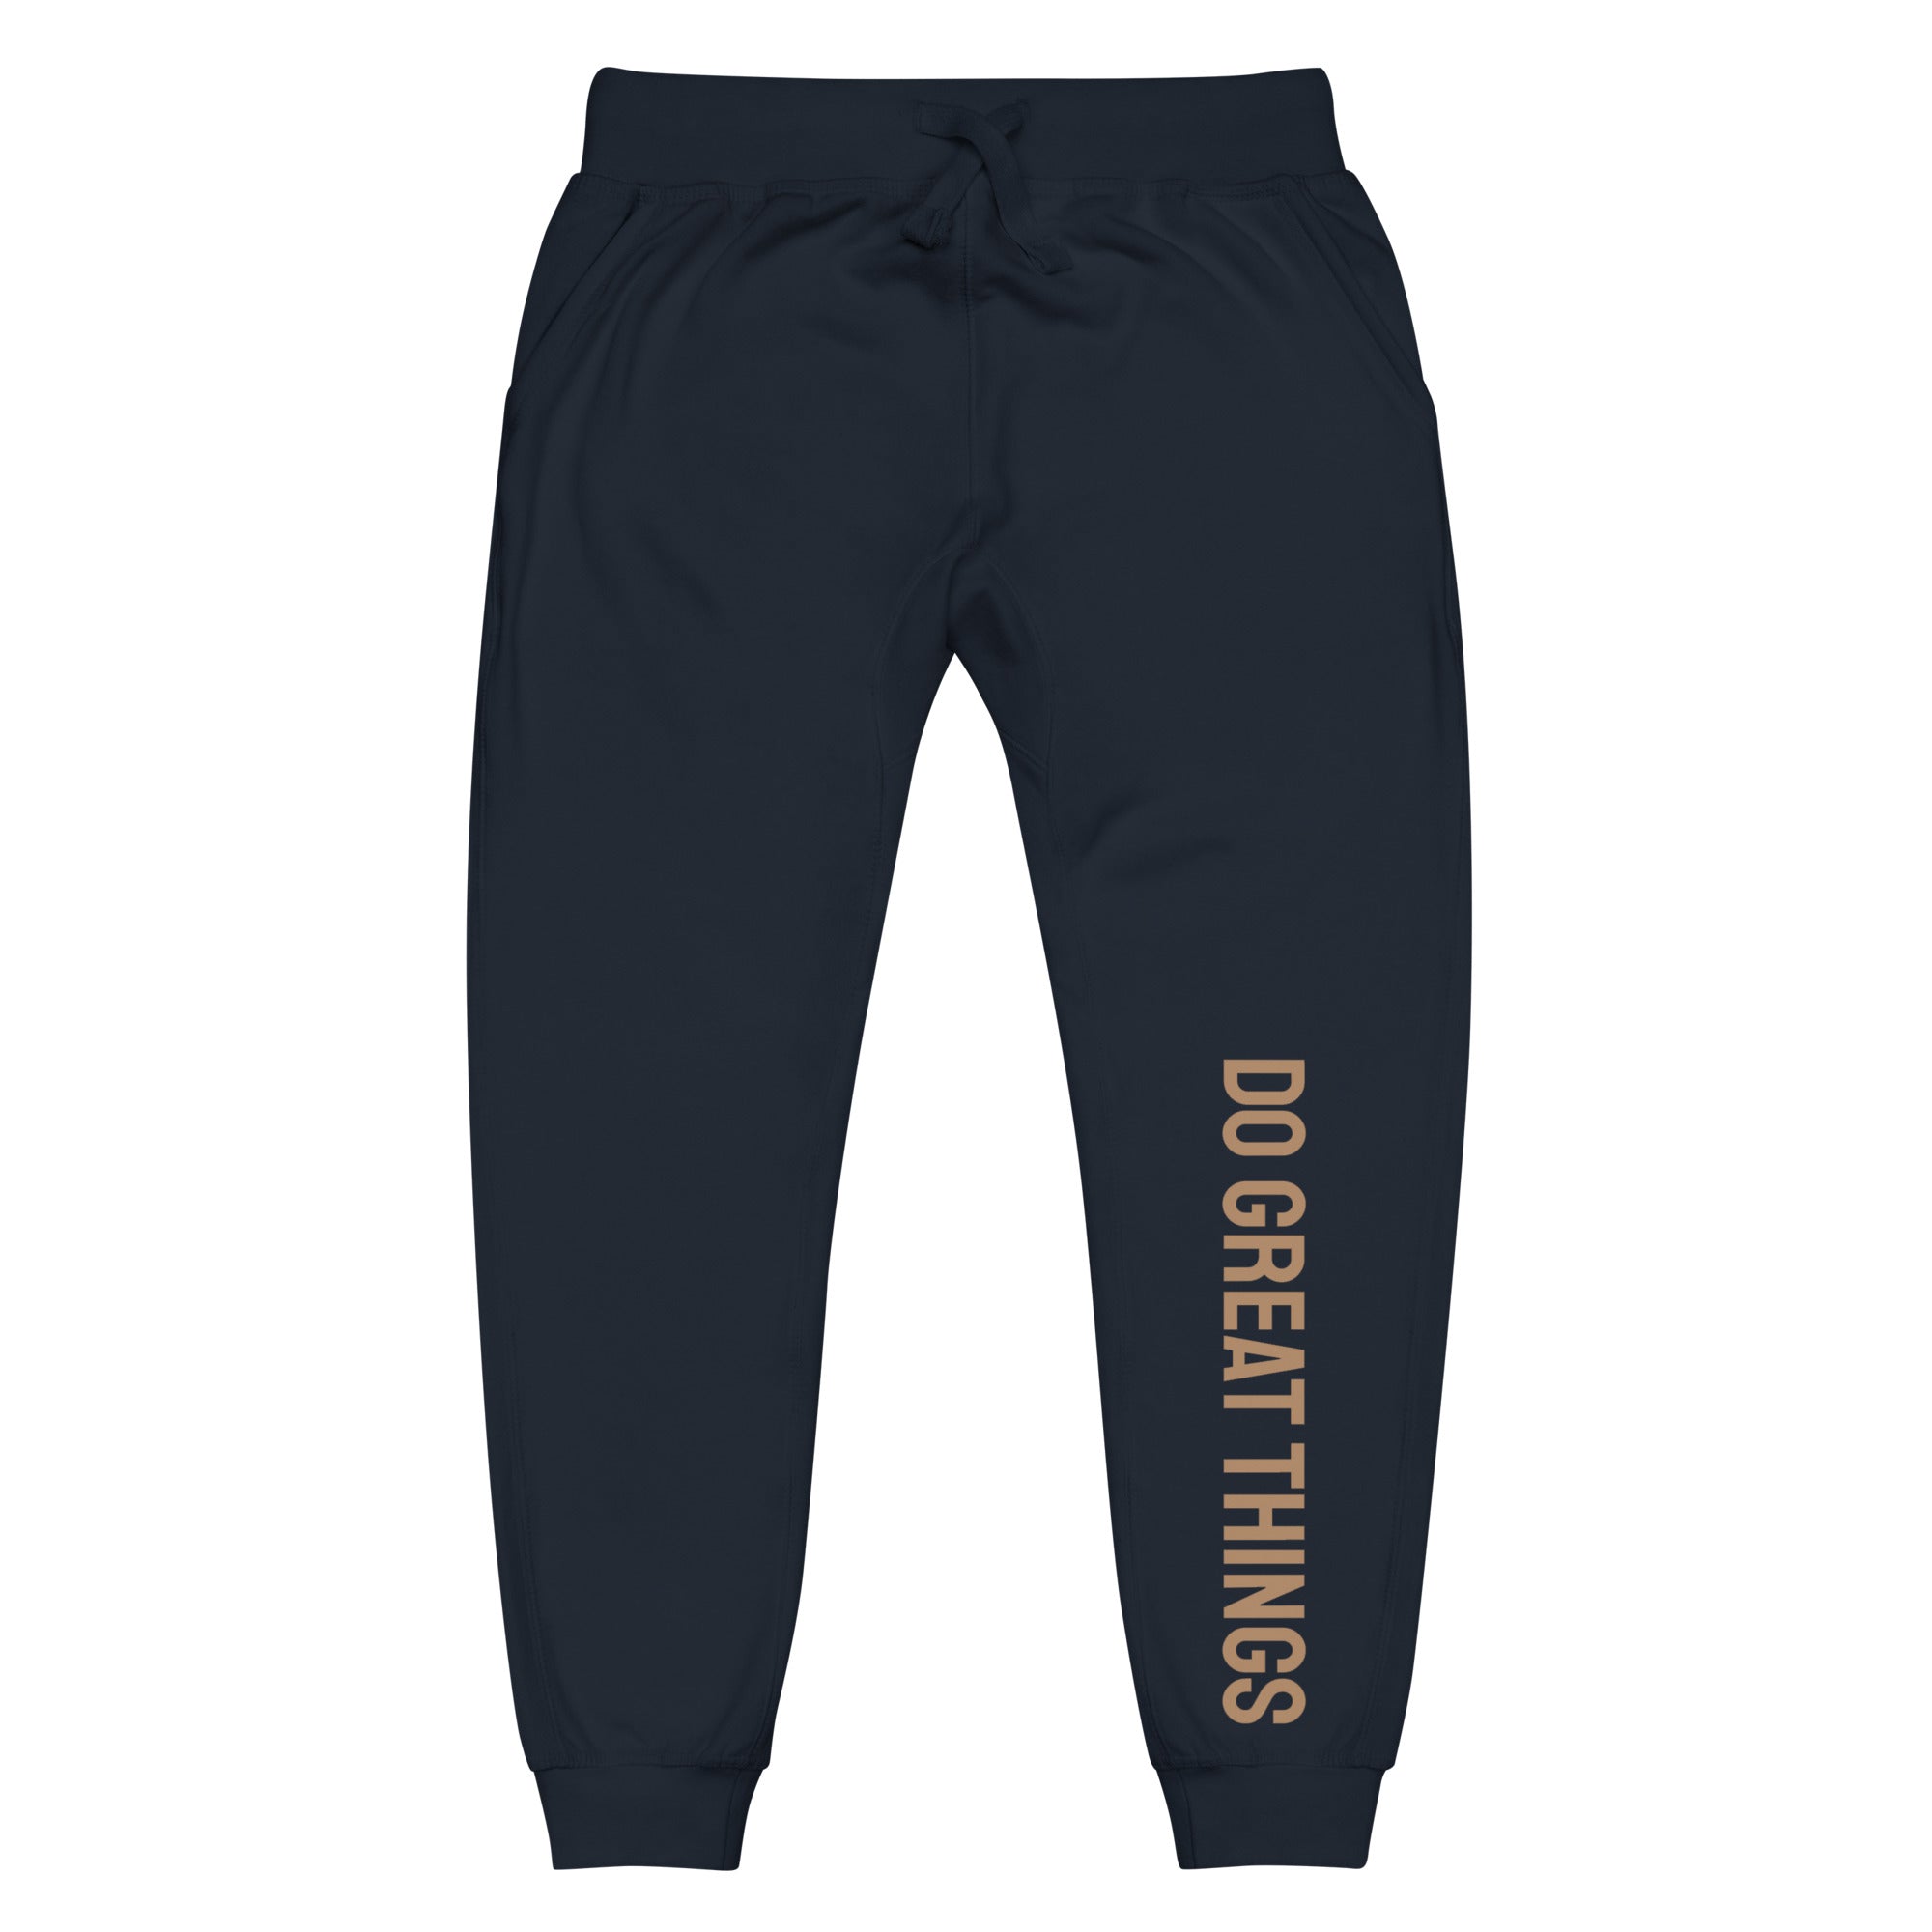 Time to Get Up and Move!! DGT Joggers - Unisex fleece sweatpants